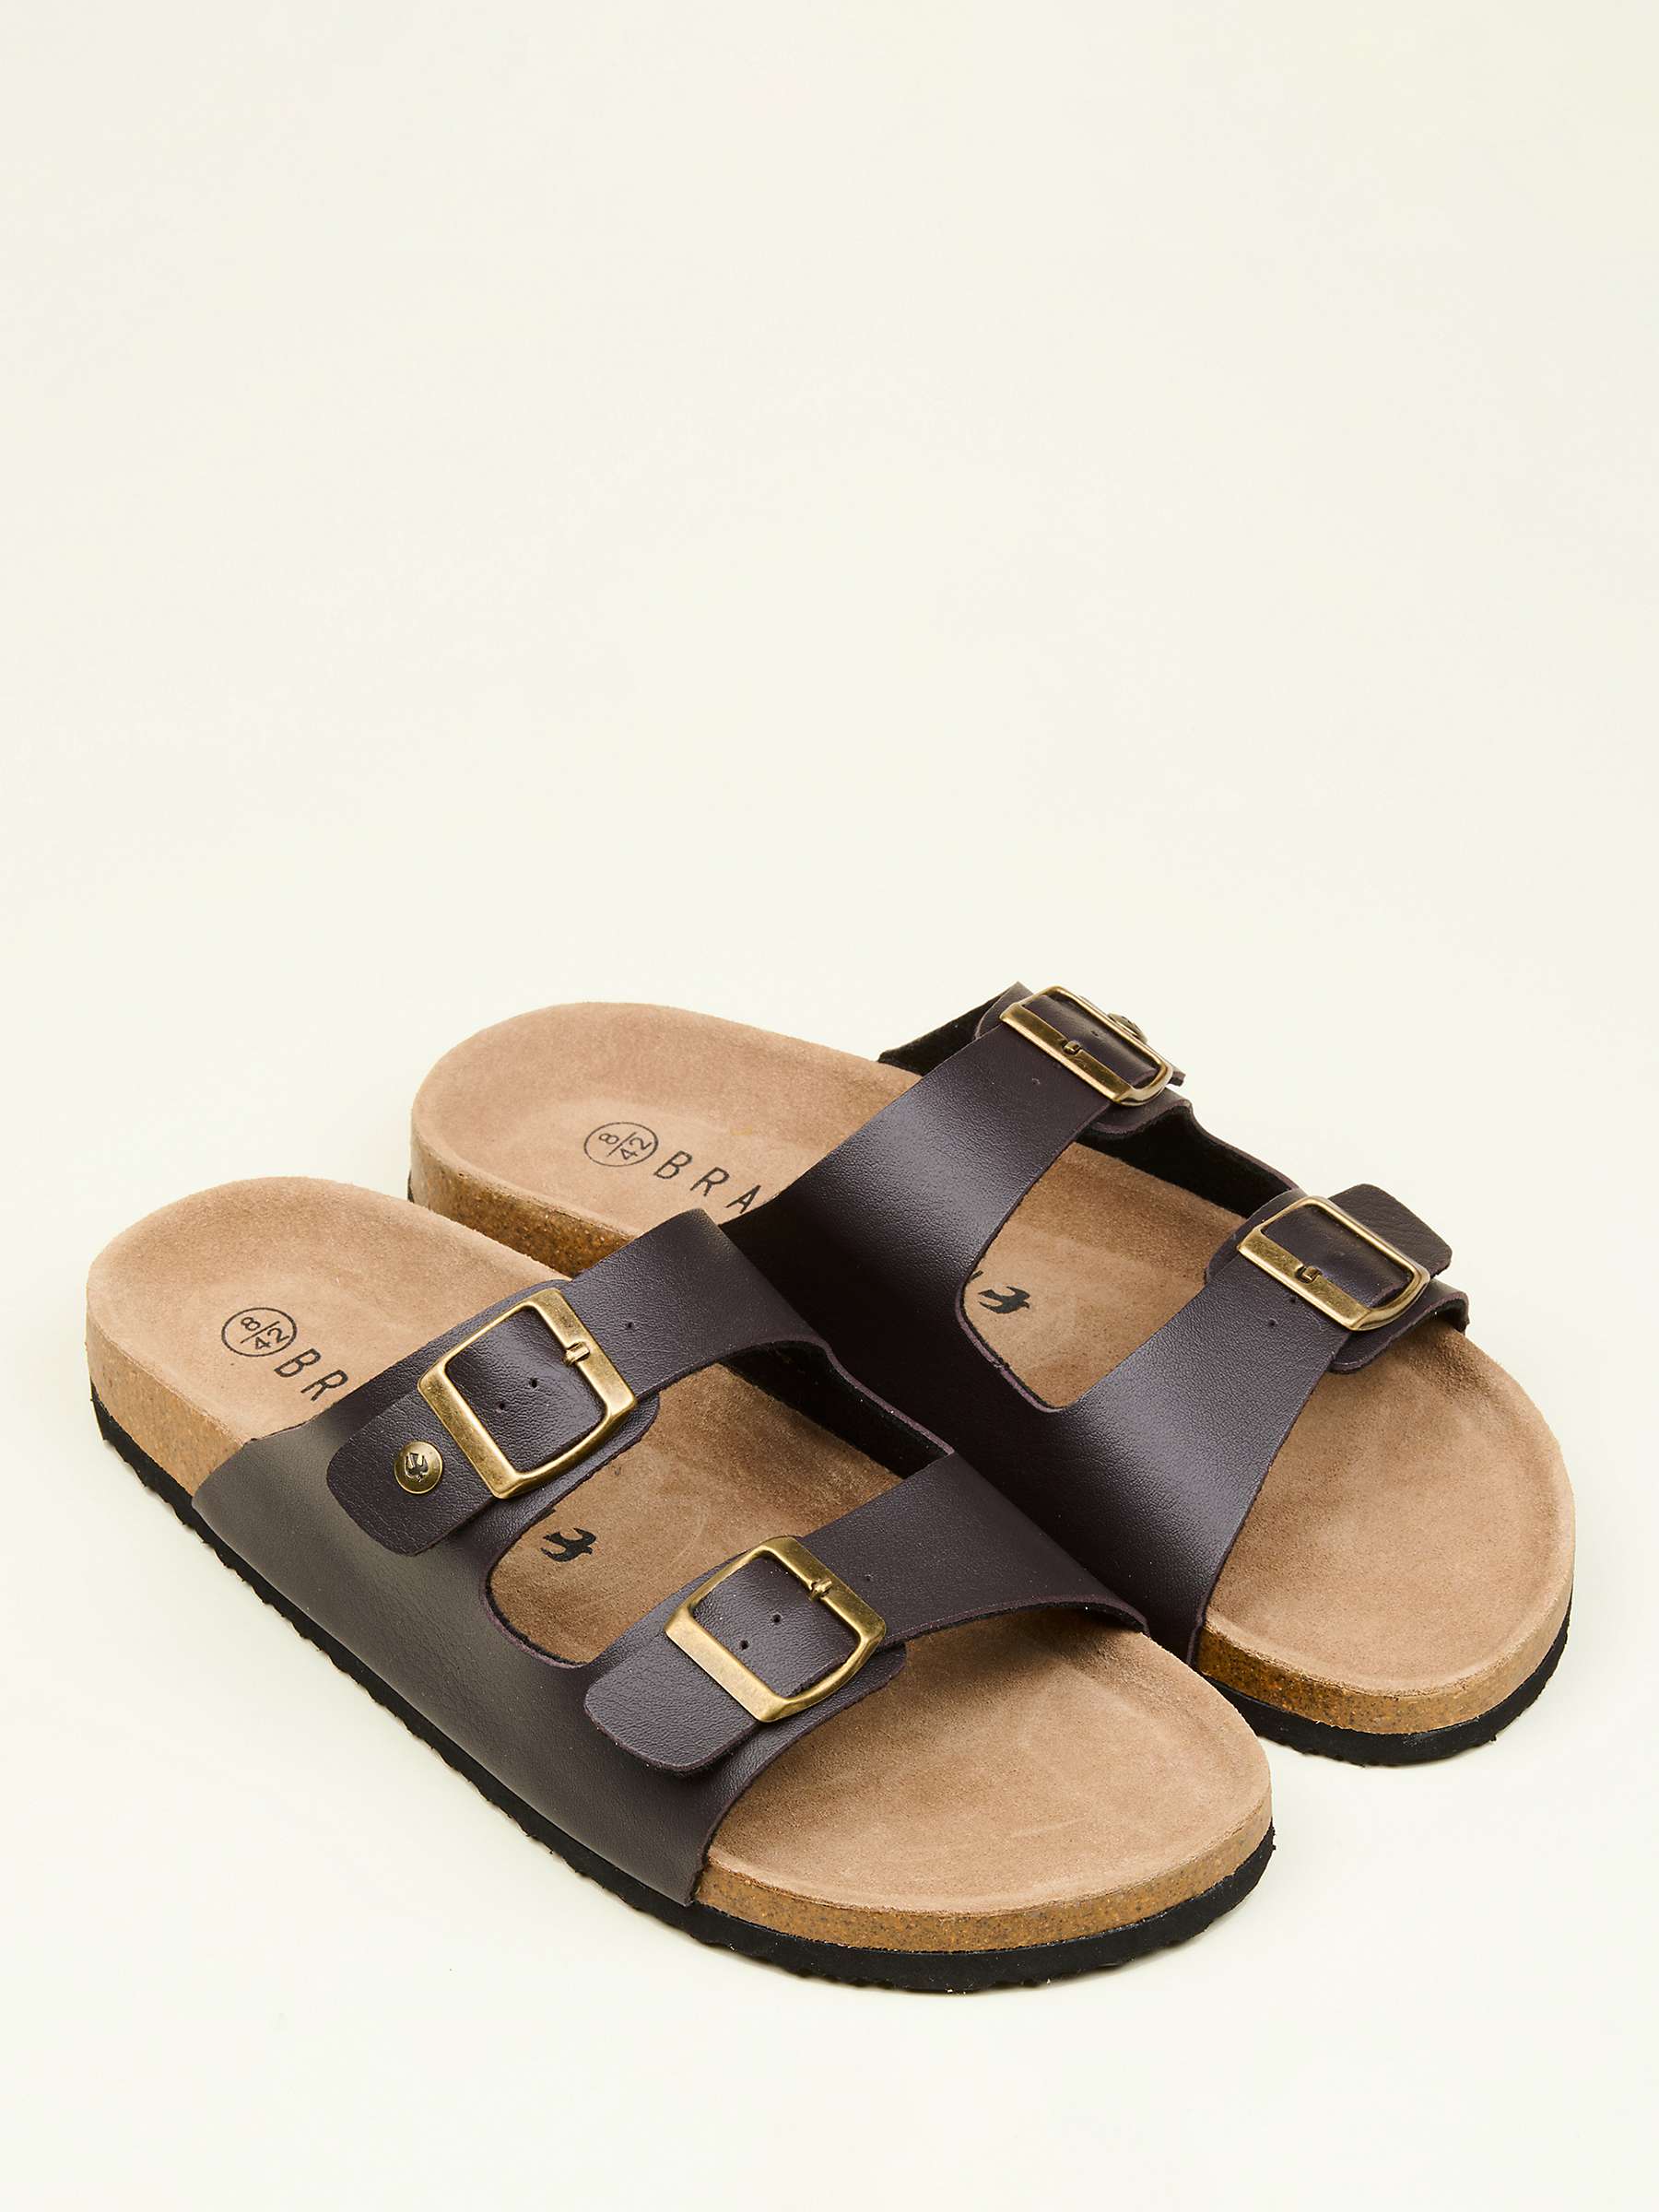 Buy Brakeburn Classic Two Strap Sandals, Brown Online at johnlewis.com